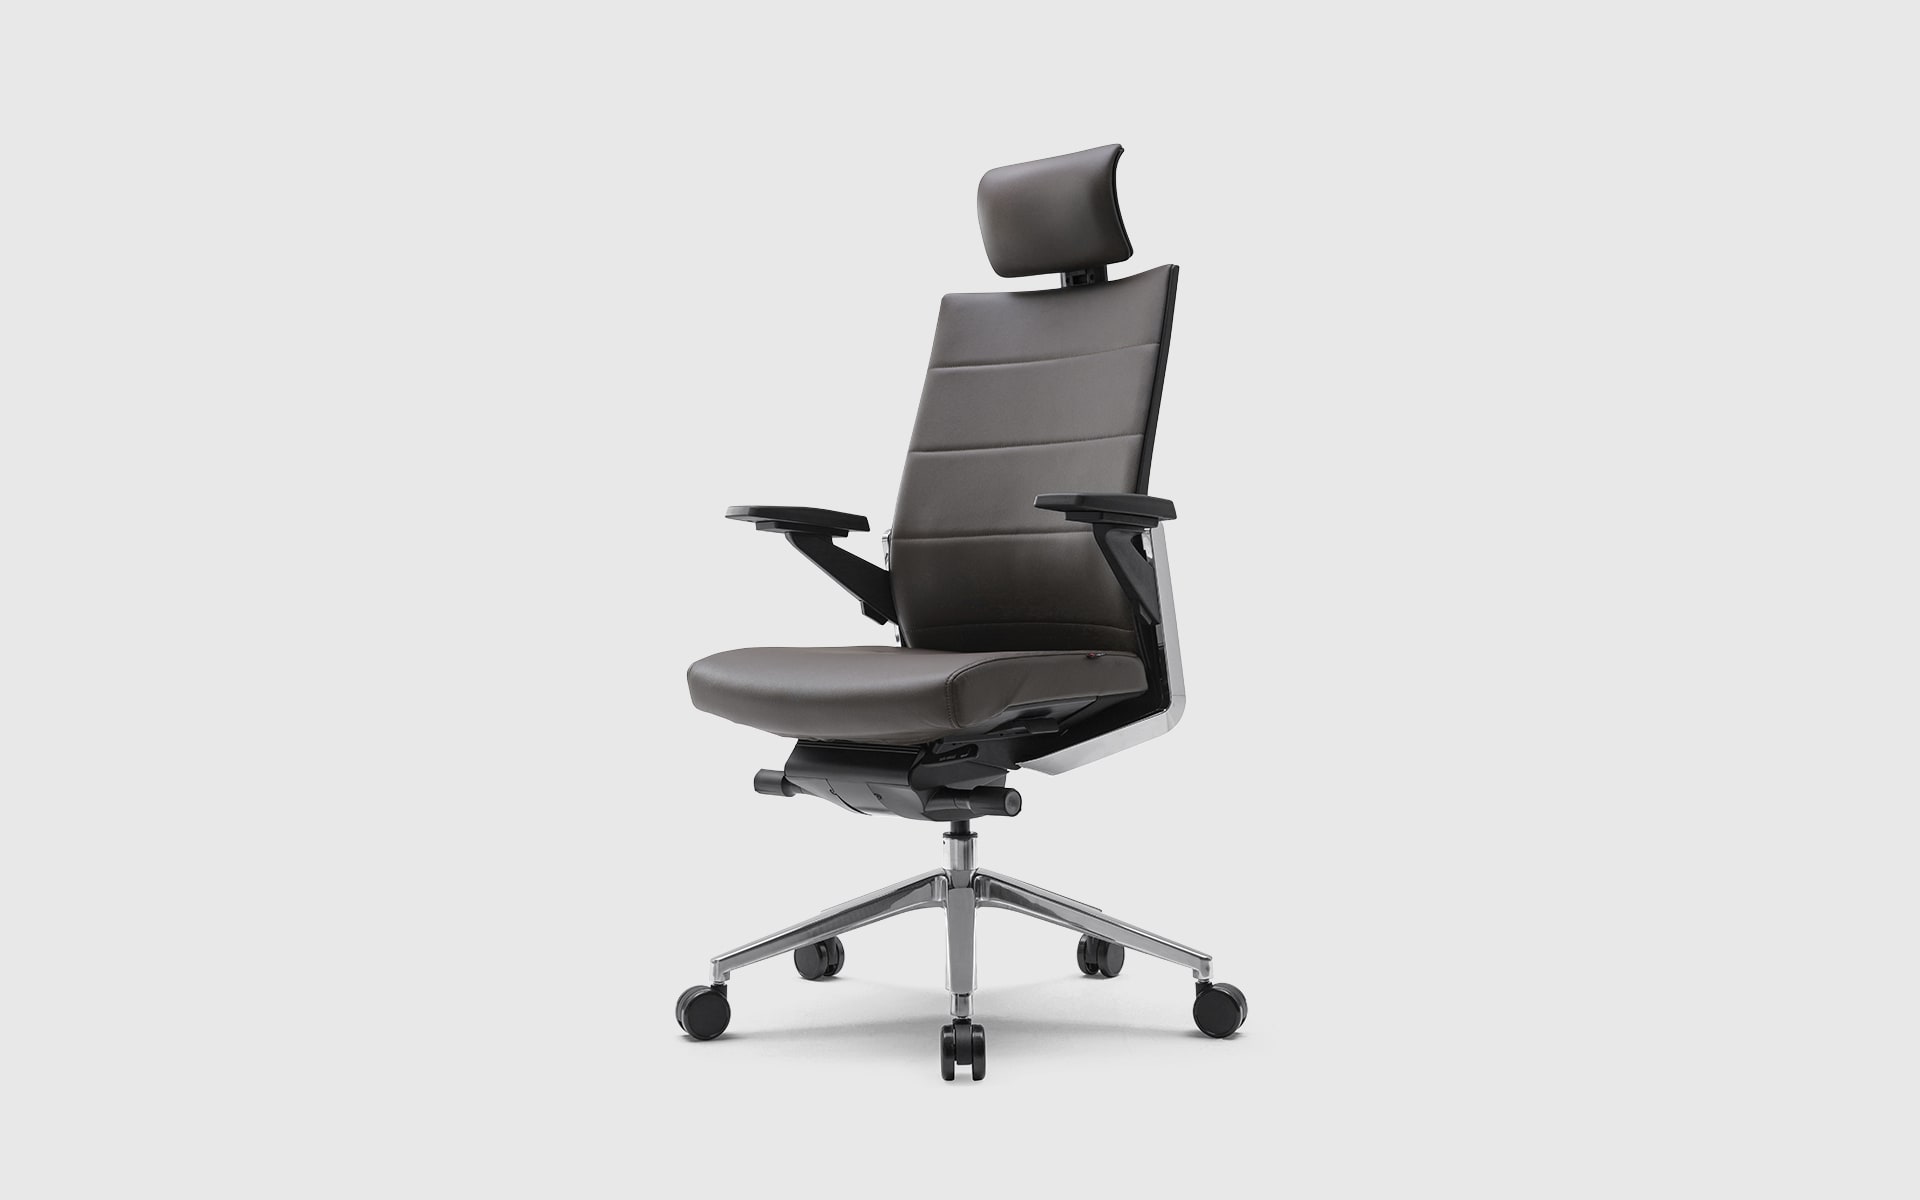 Sidiz T80 executive office chair by ITO Design with brown backrest